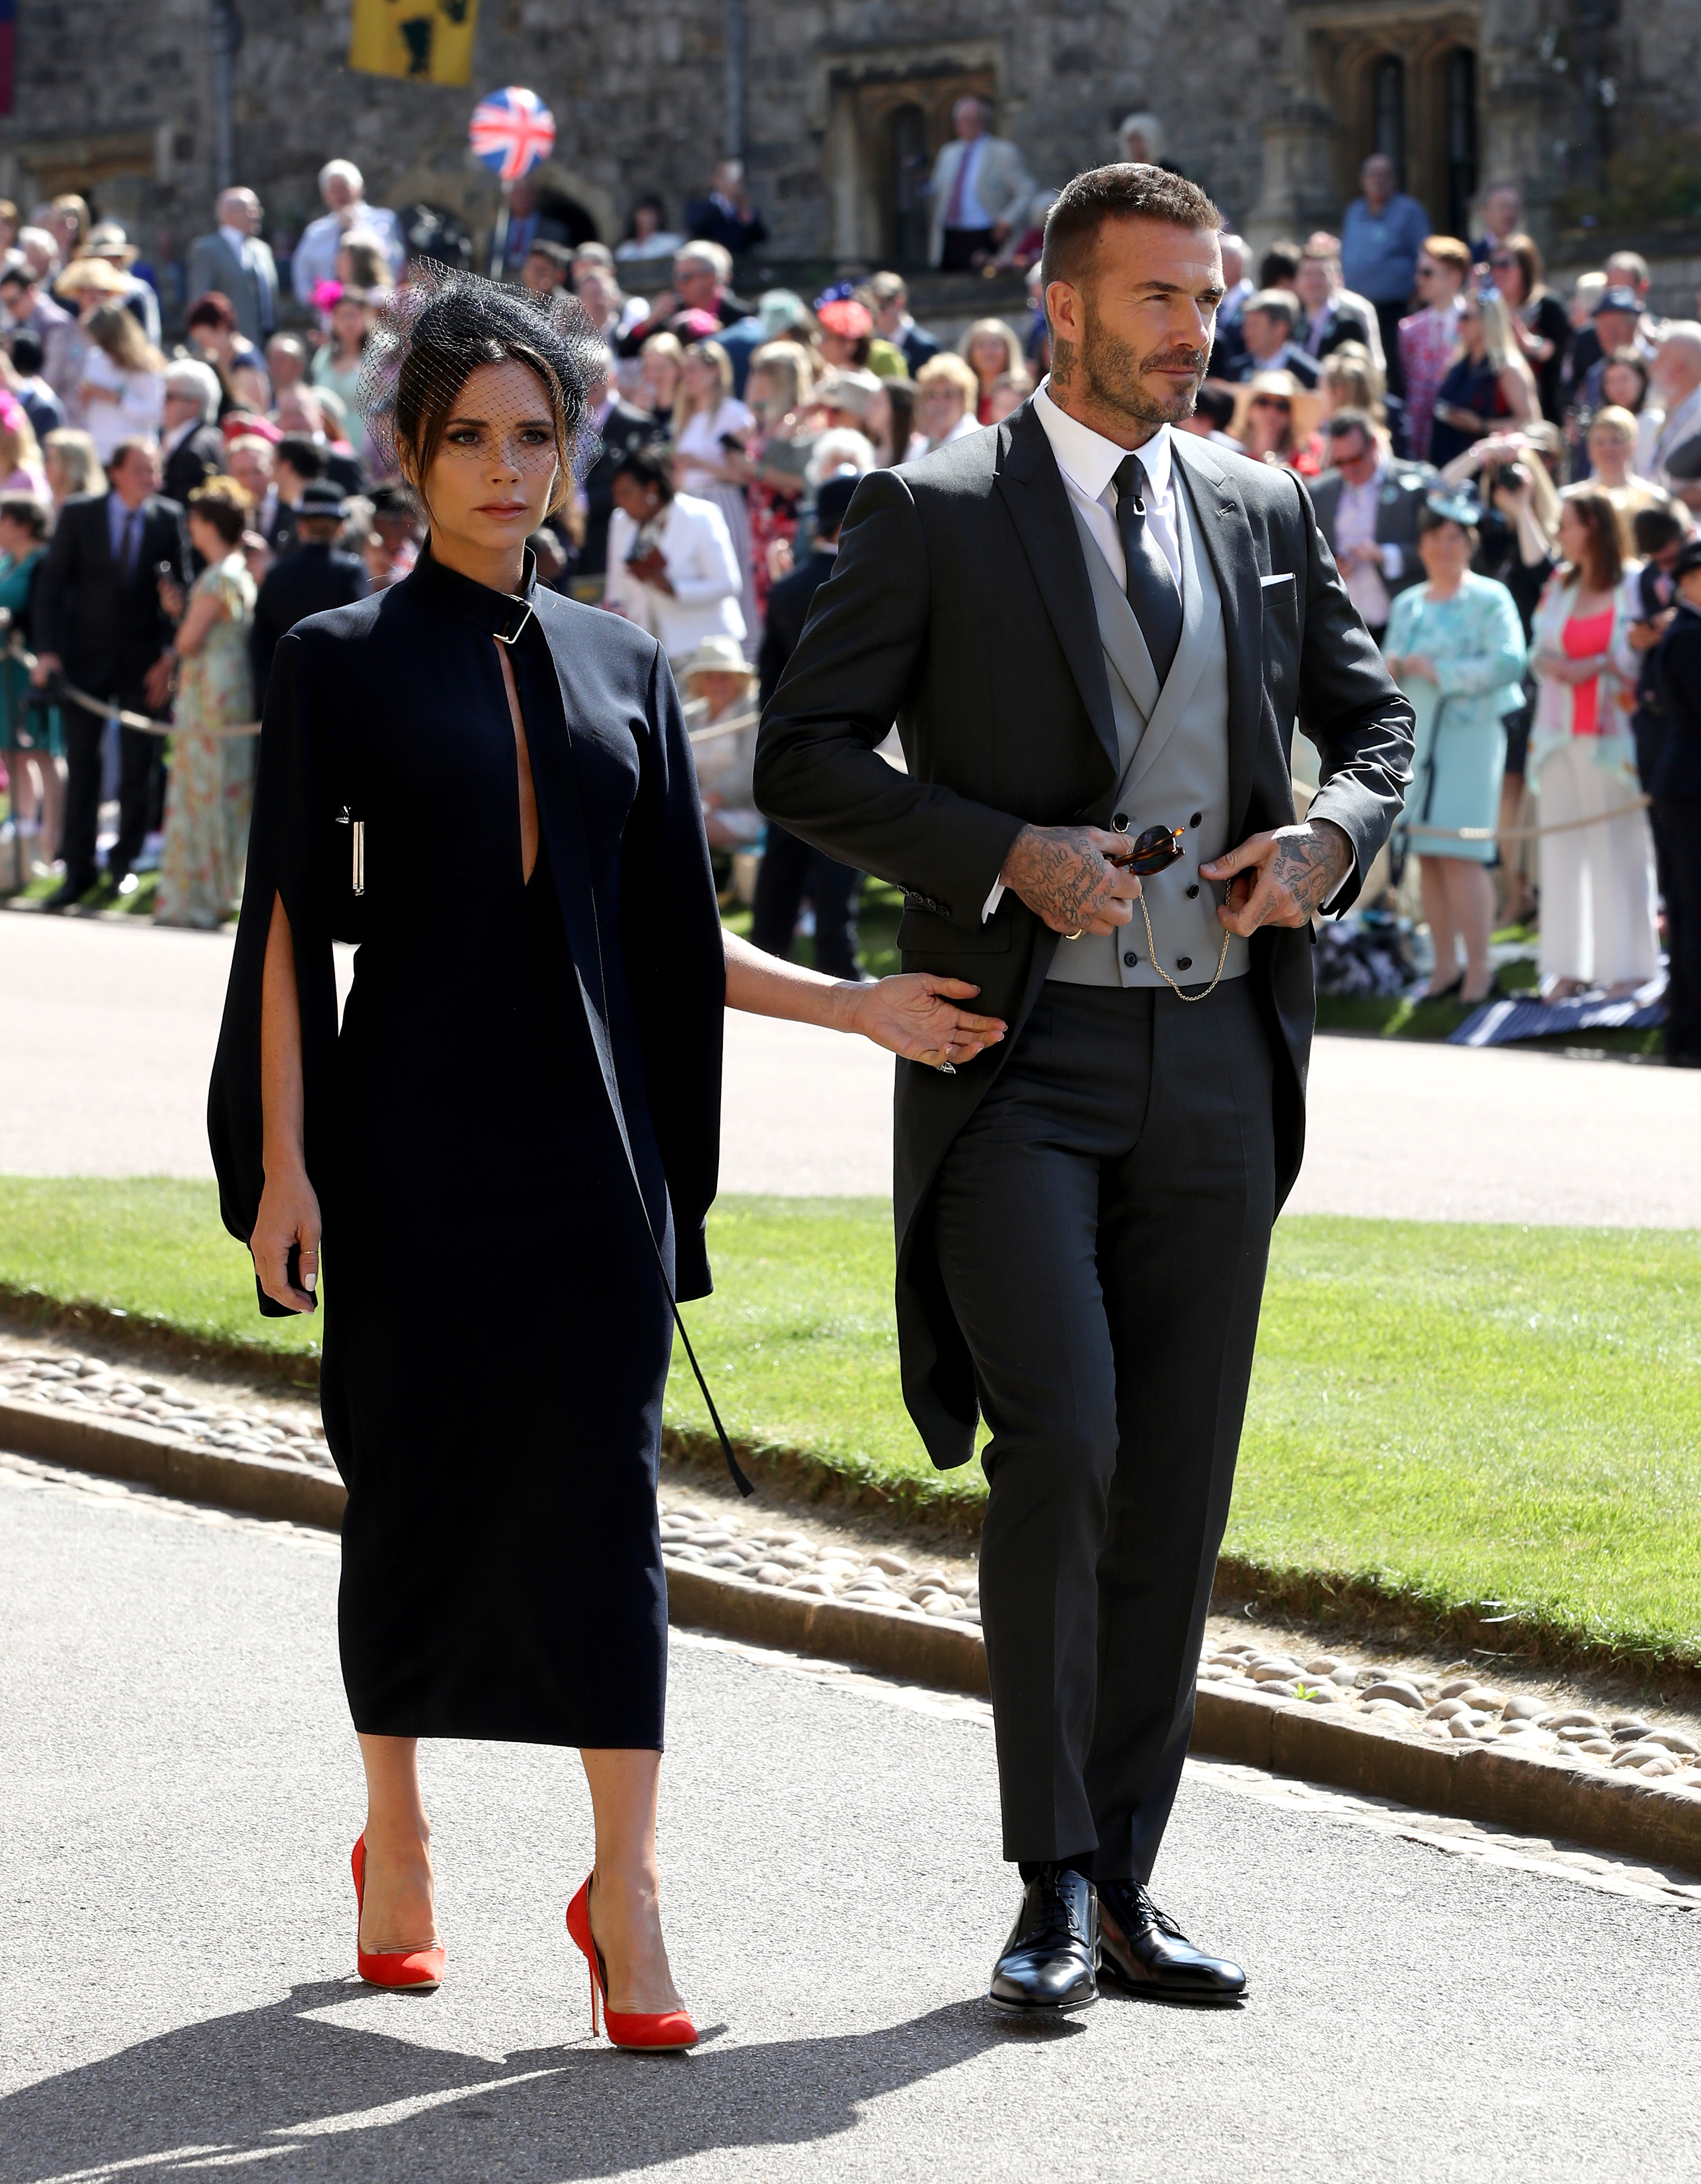 Royal wedding best dressed: Which guests stood out on Meghan